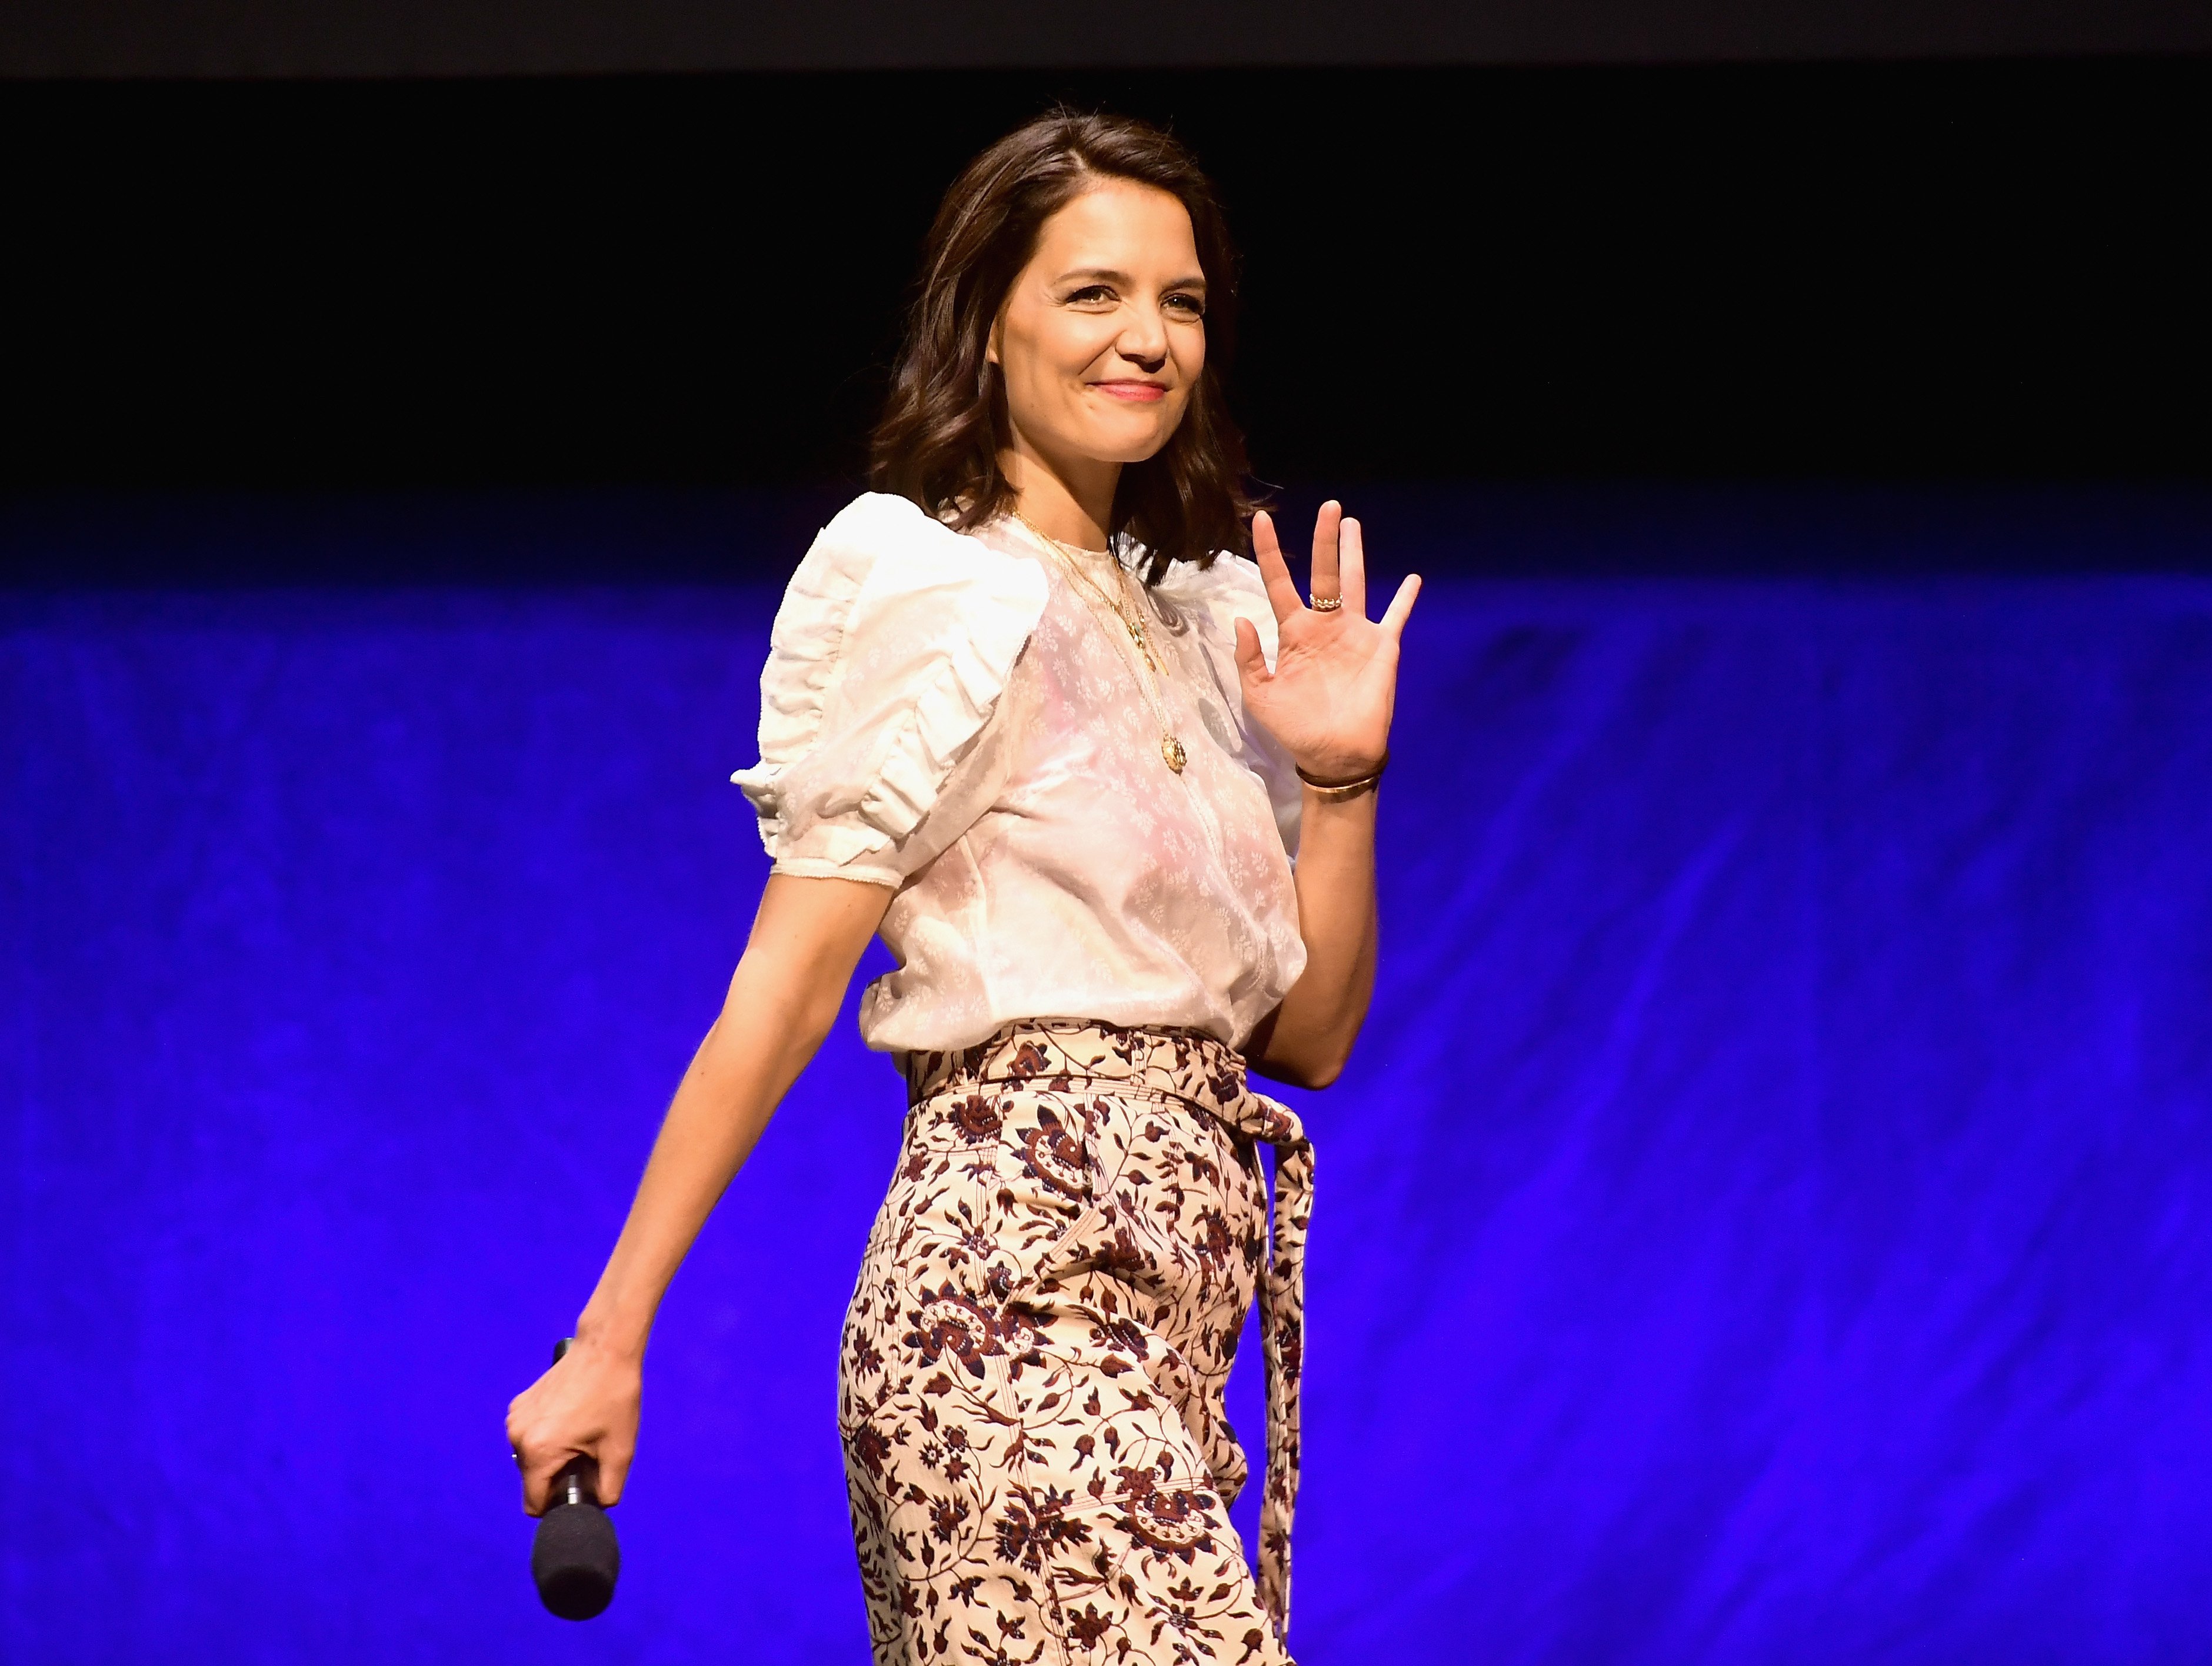 Katie Holmes attends CinemaCon 2019 in Las Vegas, Nevada on April 2, 2019 | Photo: Getty Images